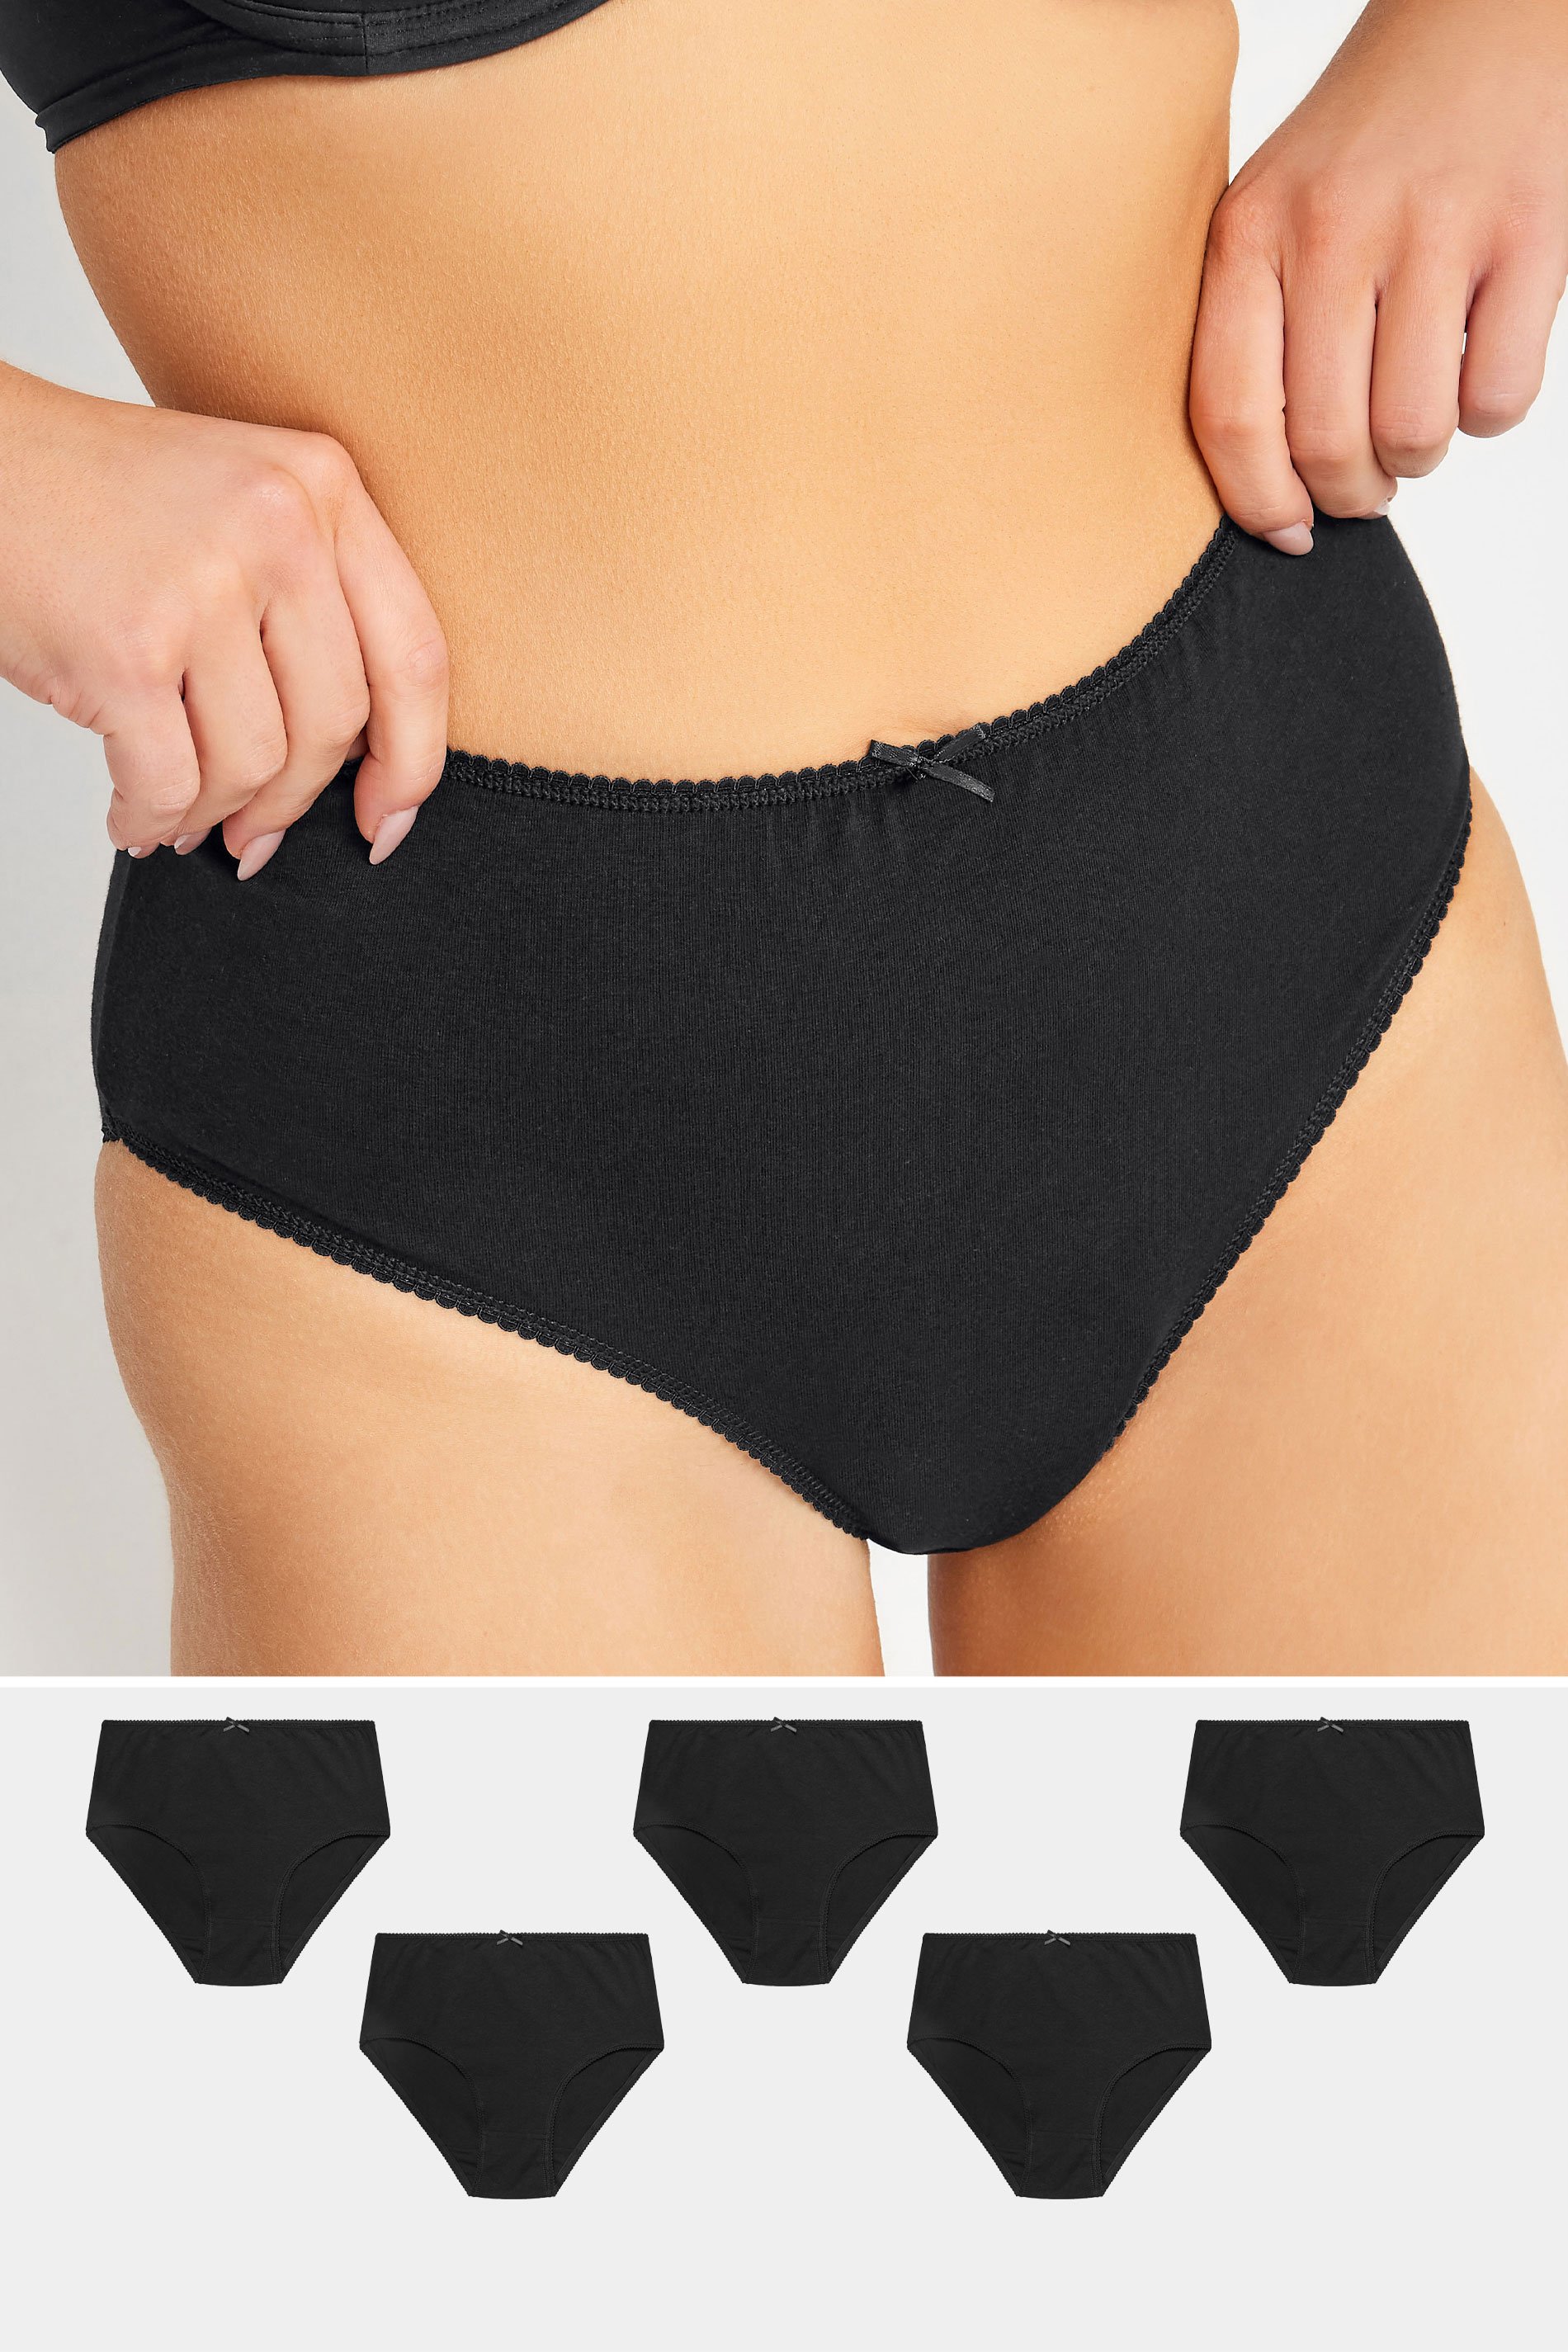 M&Co Black 5 PACK High Waisted Full Briefs | M&Co  1